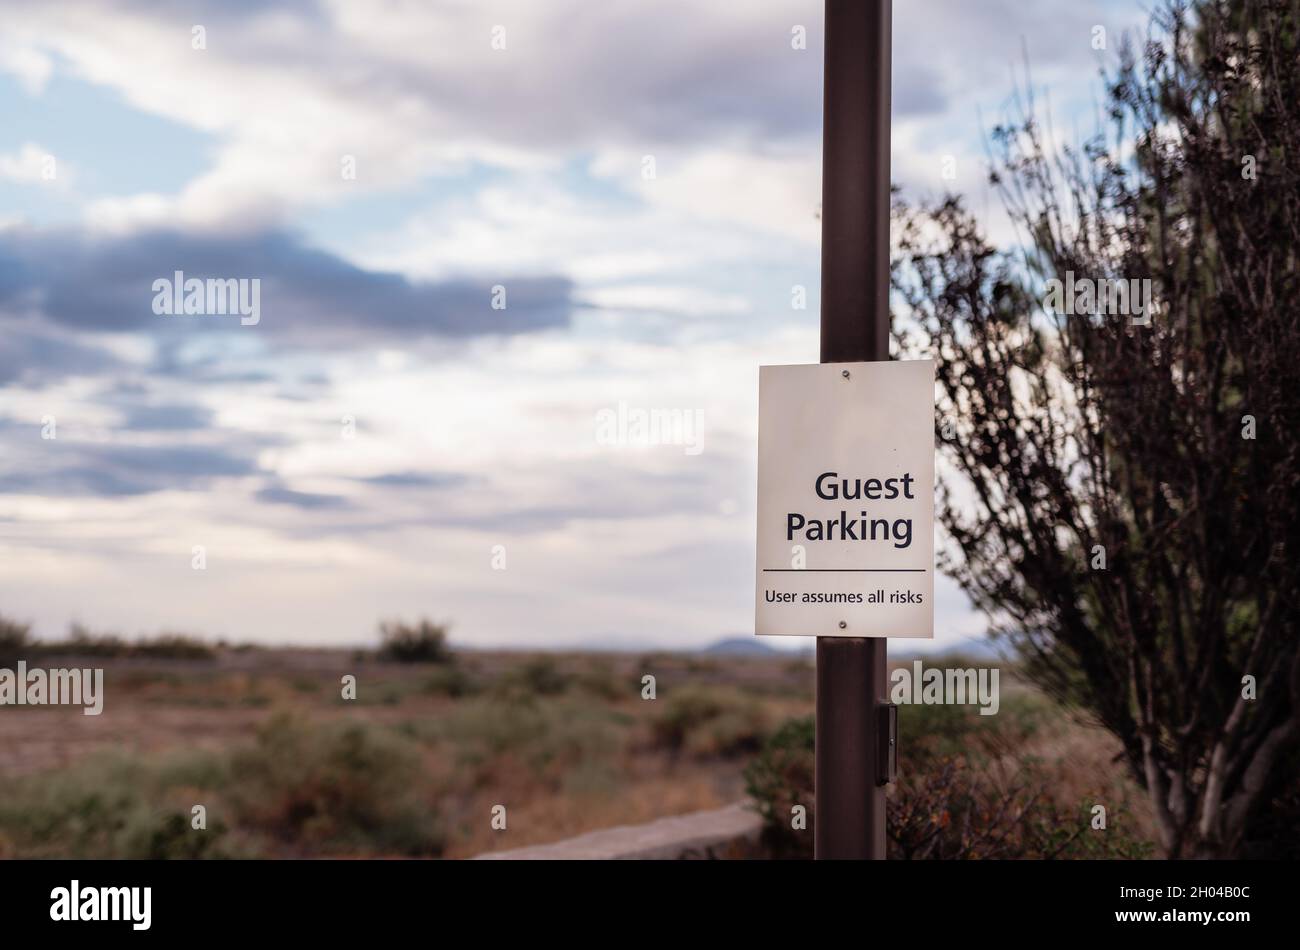 'Guest Parking' sign on the metal pole, Deming, New Mexico Stock Photo